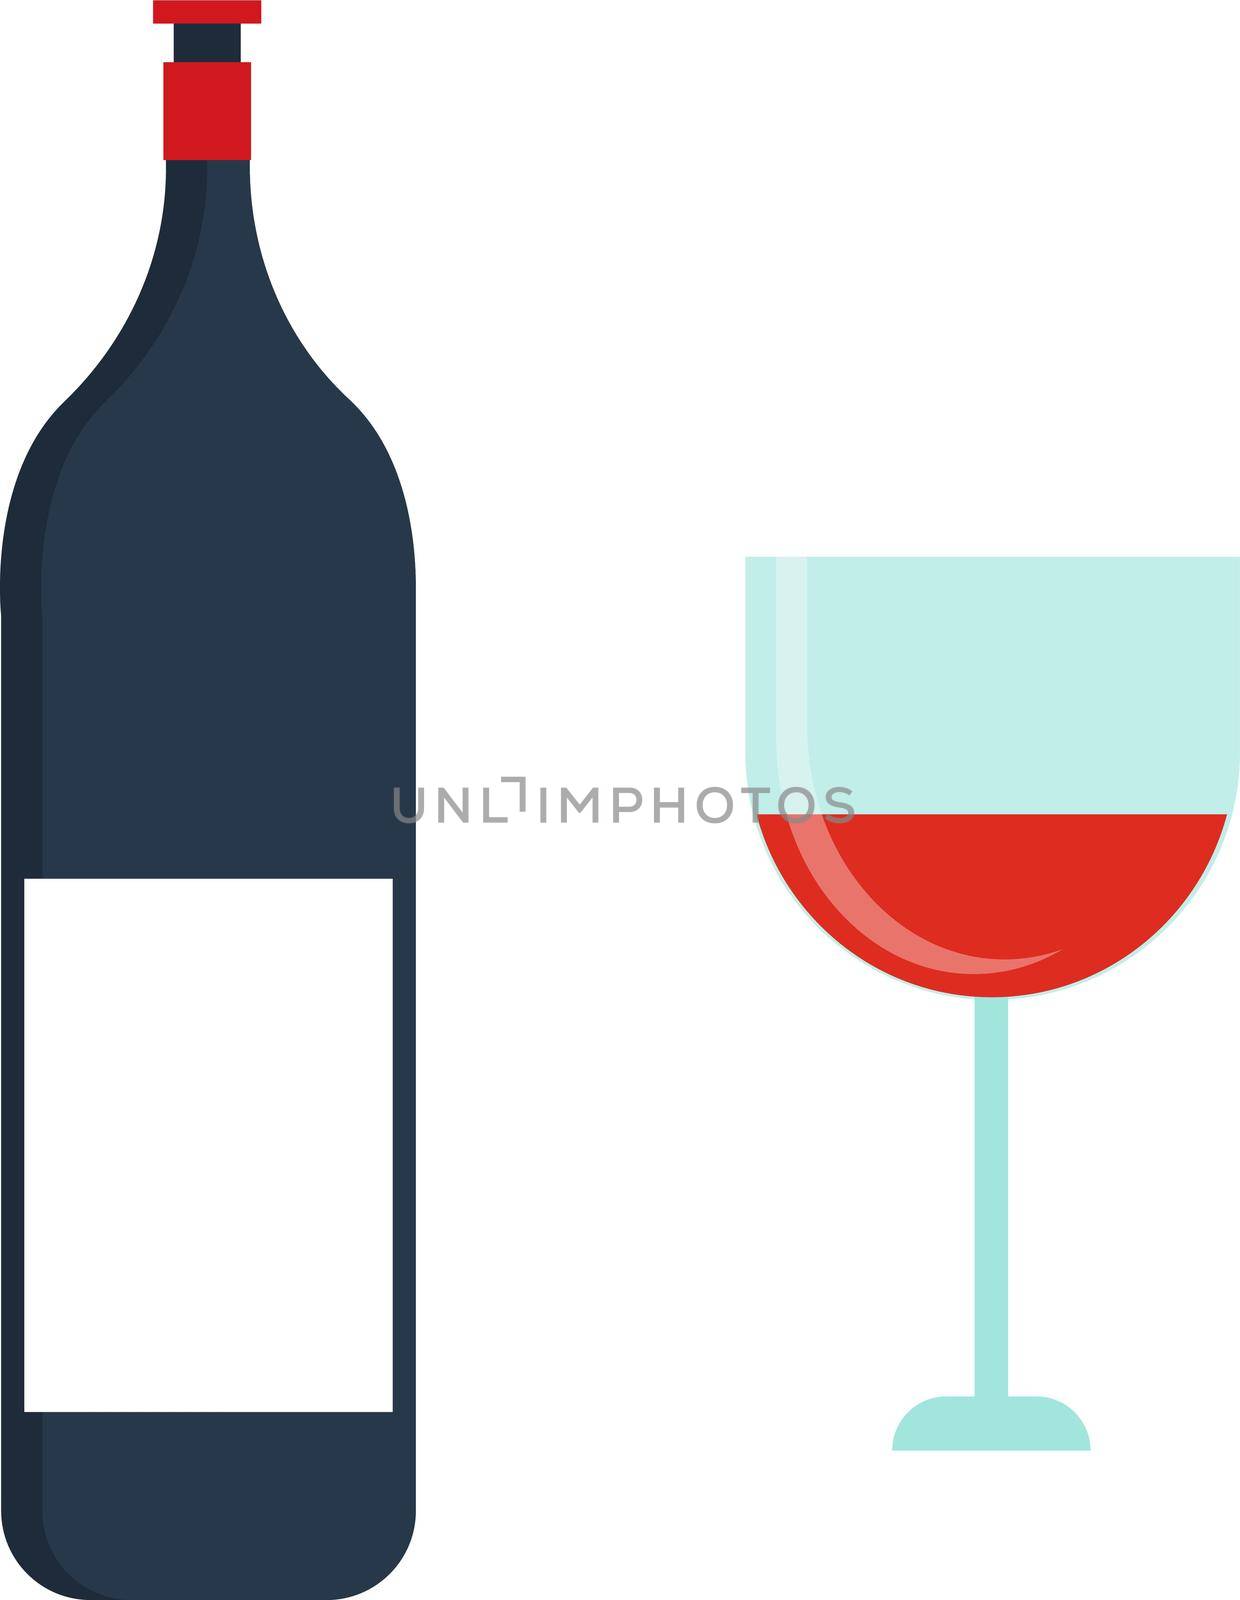 Wine bottle and glass, illustration, vector on white background.